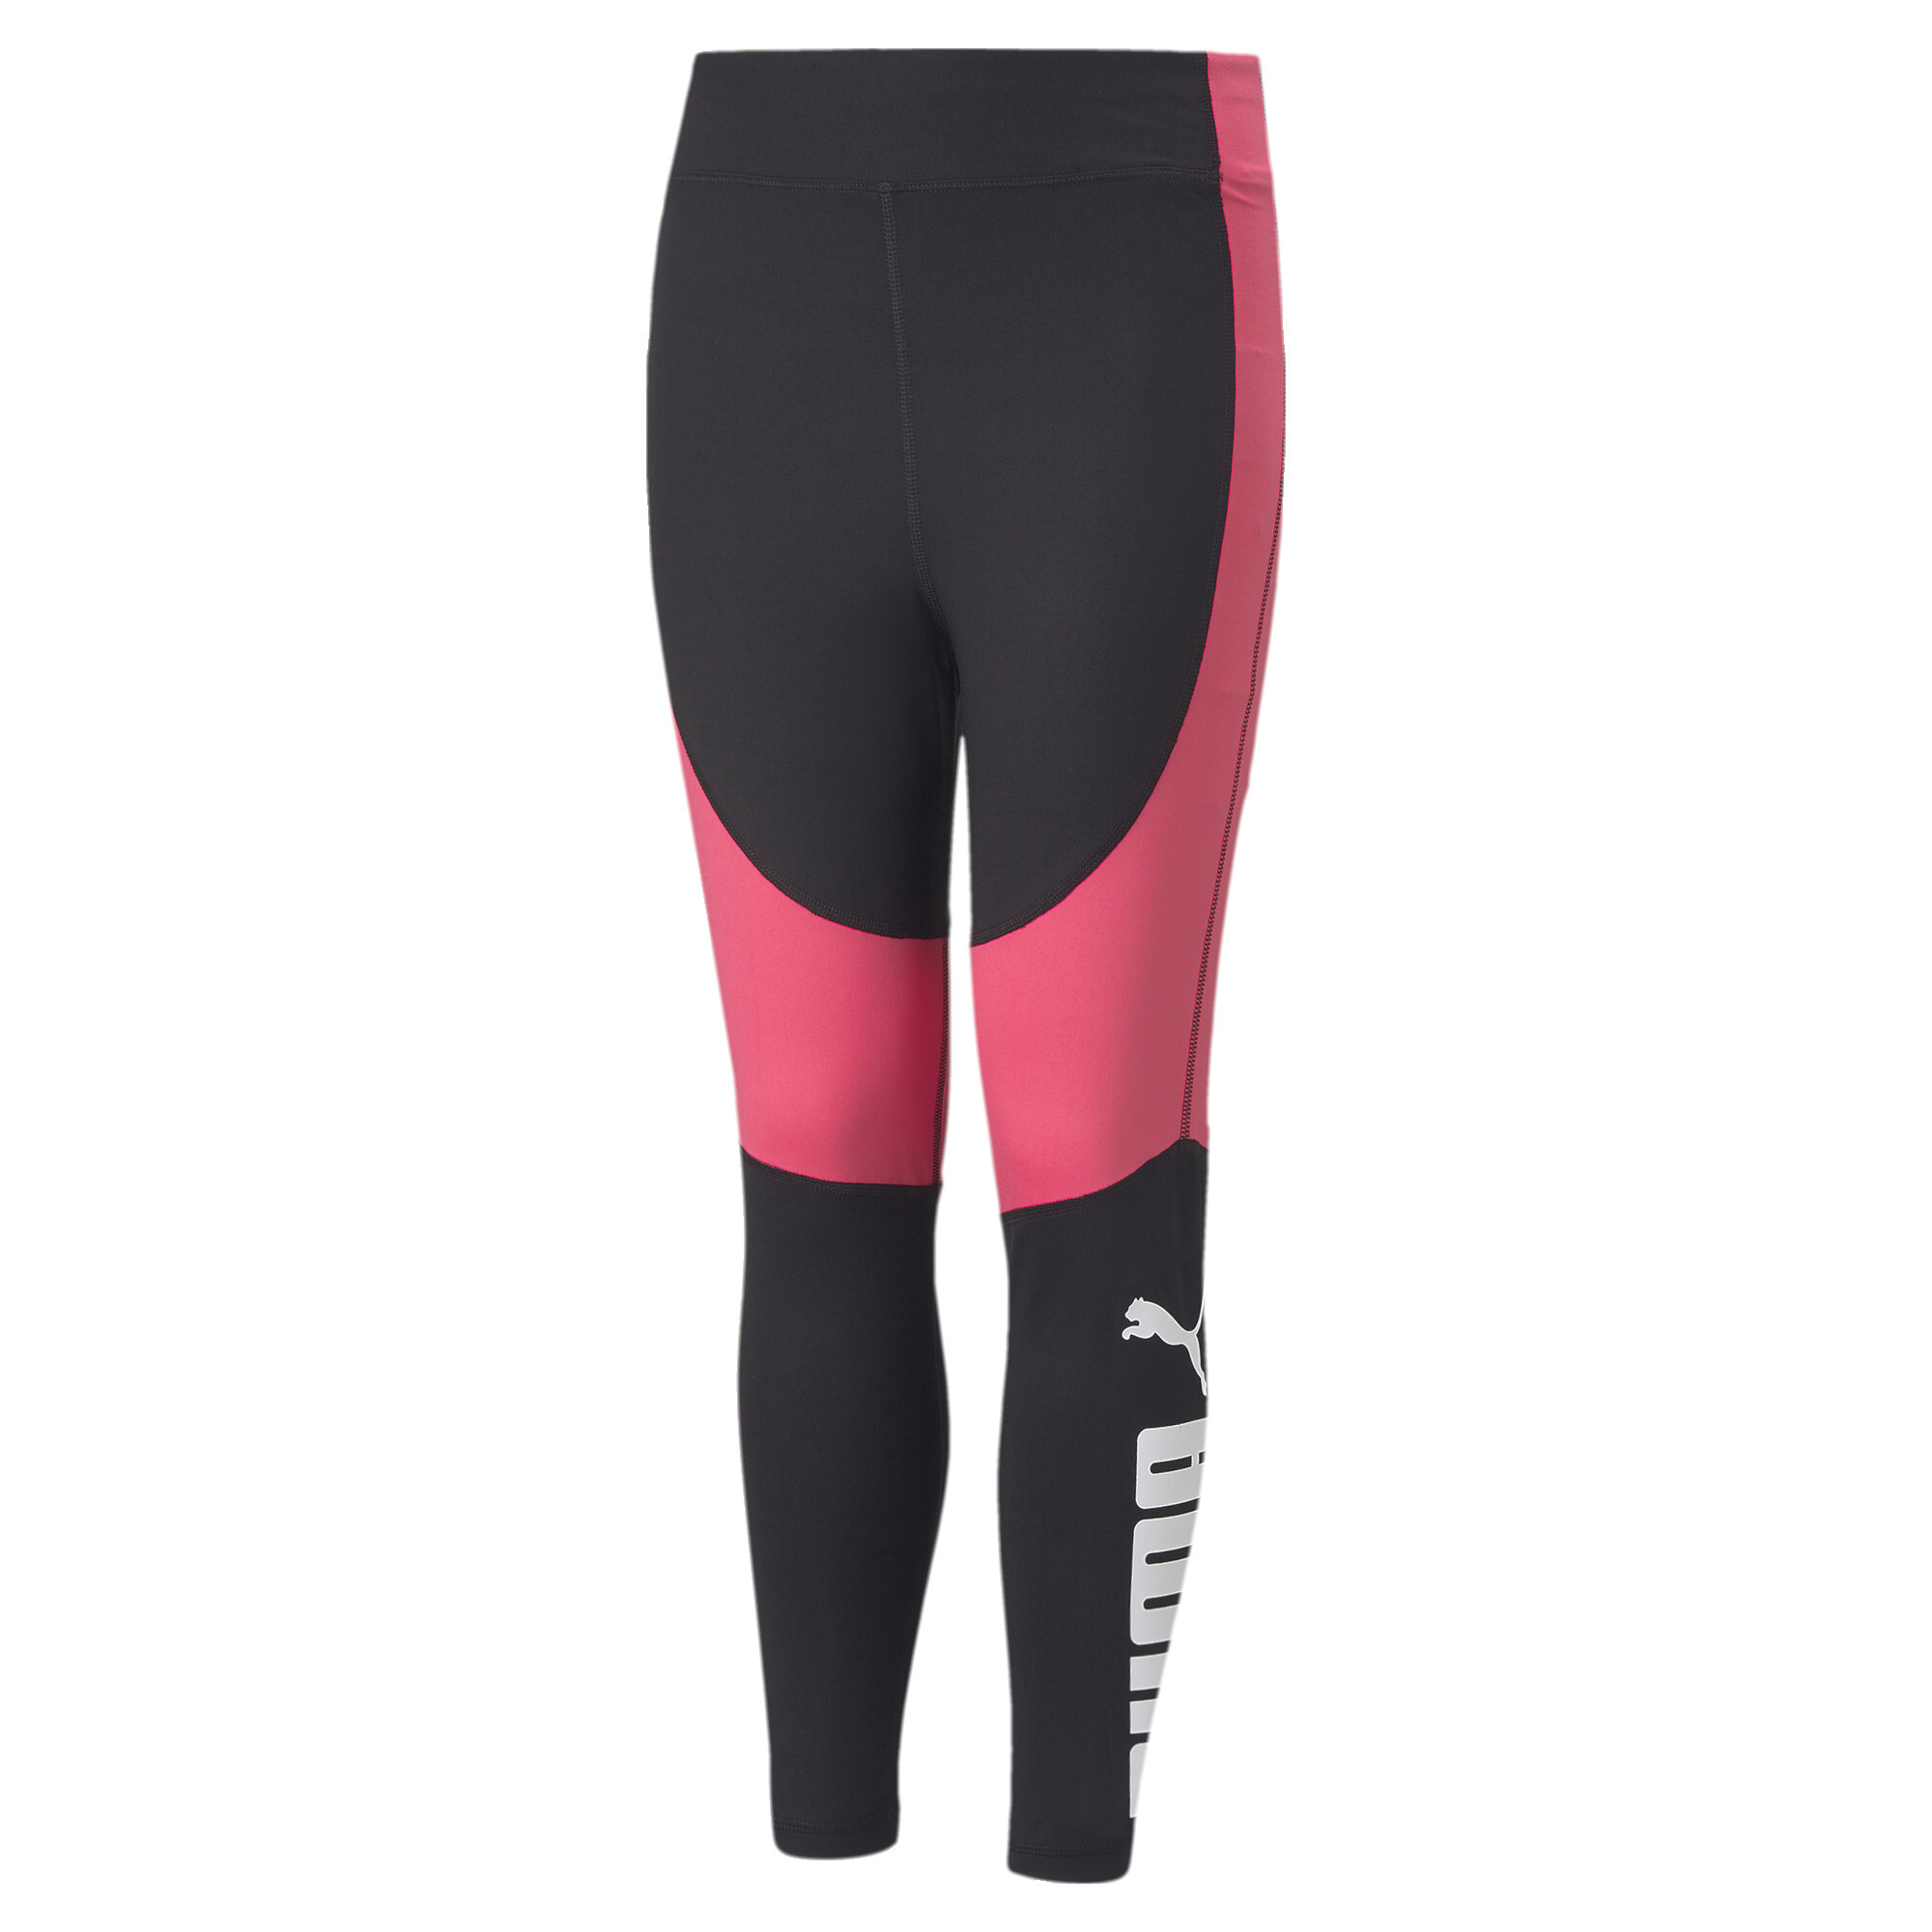 PUMA Favourites Logo High Waisted 7/8 Leggings In Pink, Size 15-16 Youth